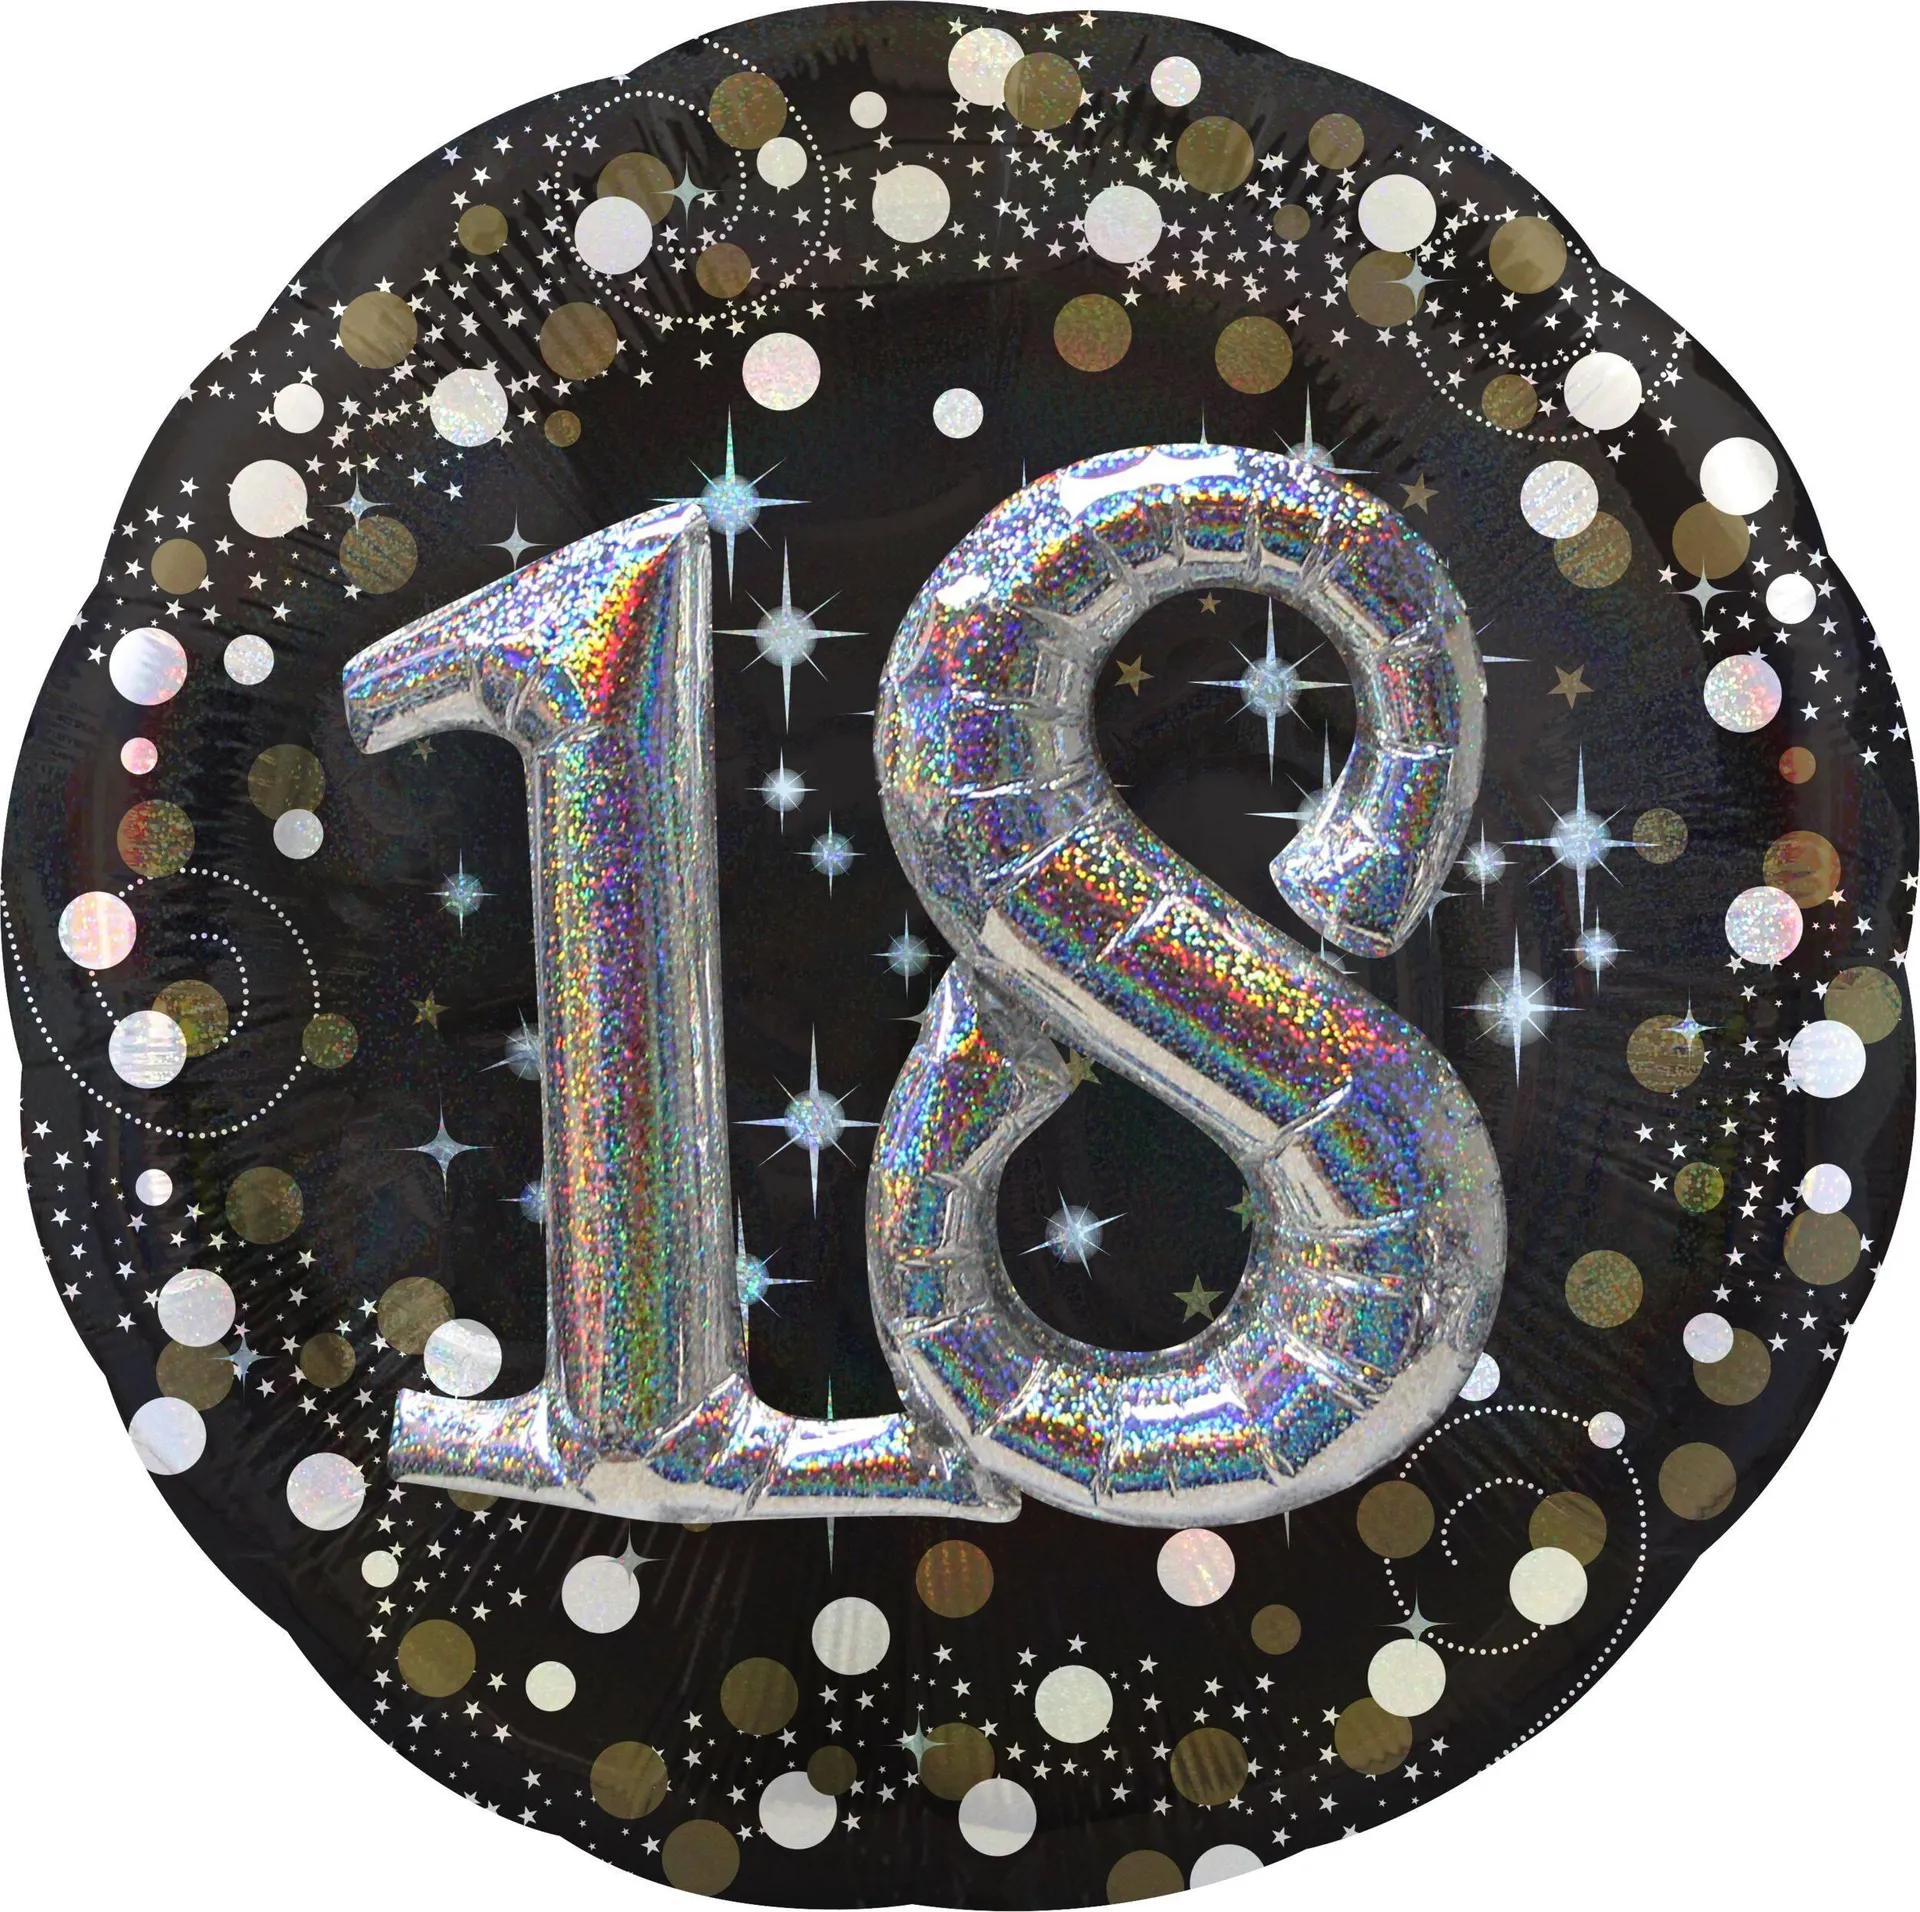 Sparkling Celebration "18" 3D Round Satin Foil Balloon, Black/Gold, Polka Dot, 32-in, Helium Inflation & Ribbon Included for Birthday Party